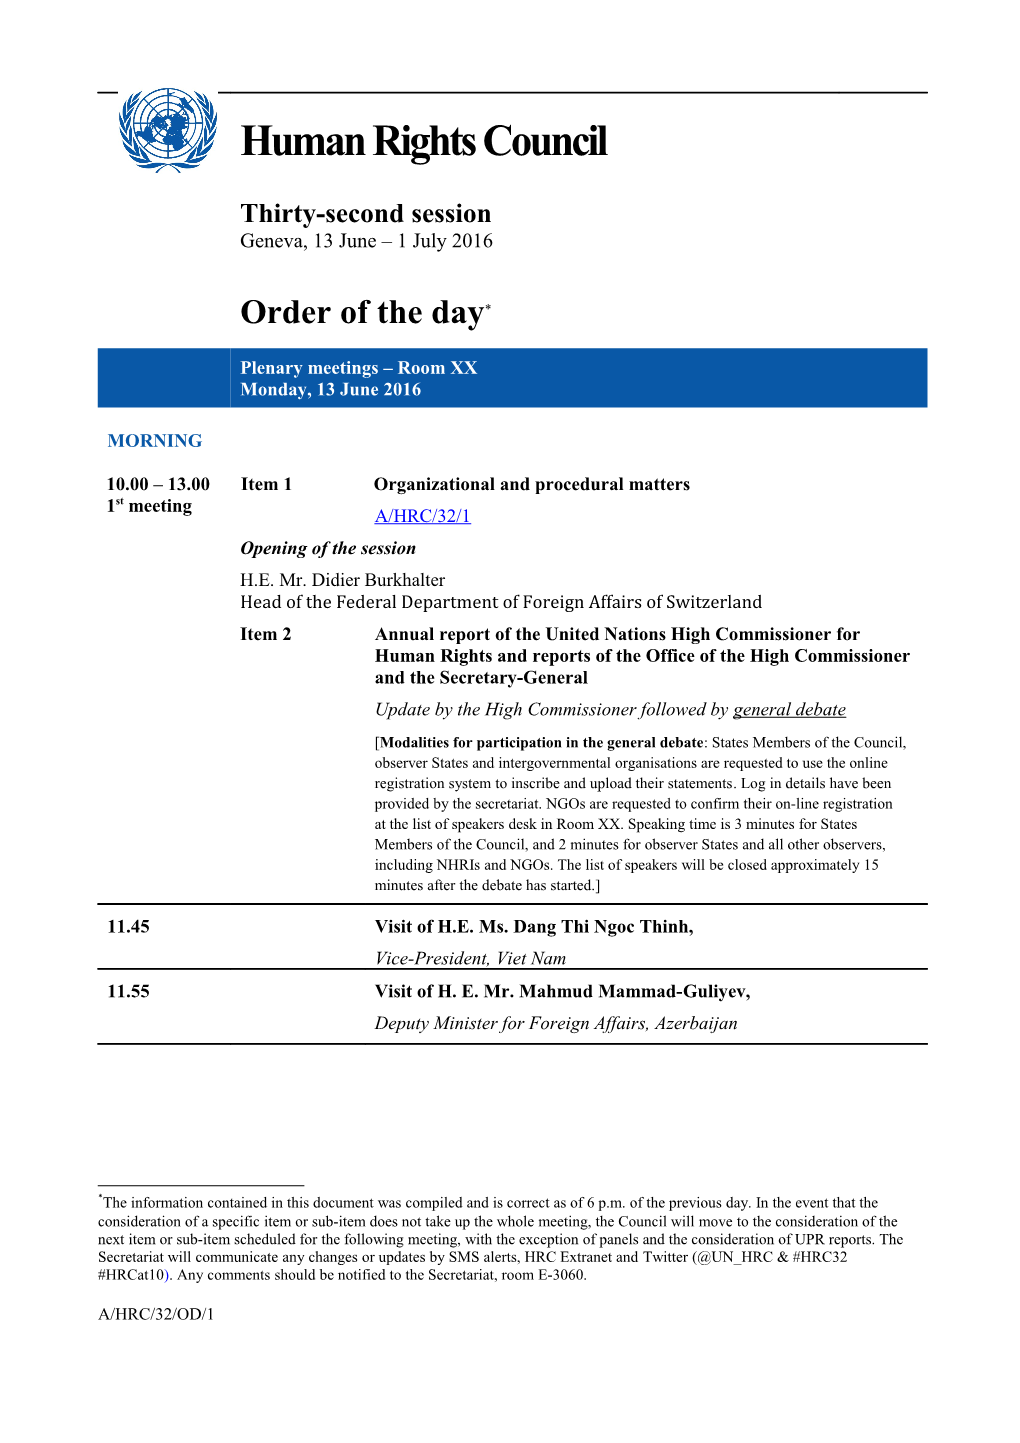 Order of the Day, Monday 13 June 2016